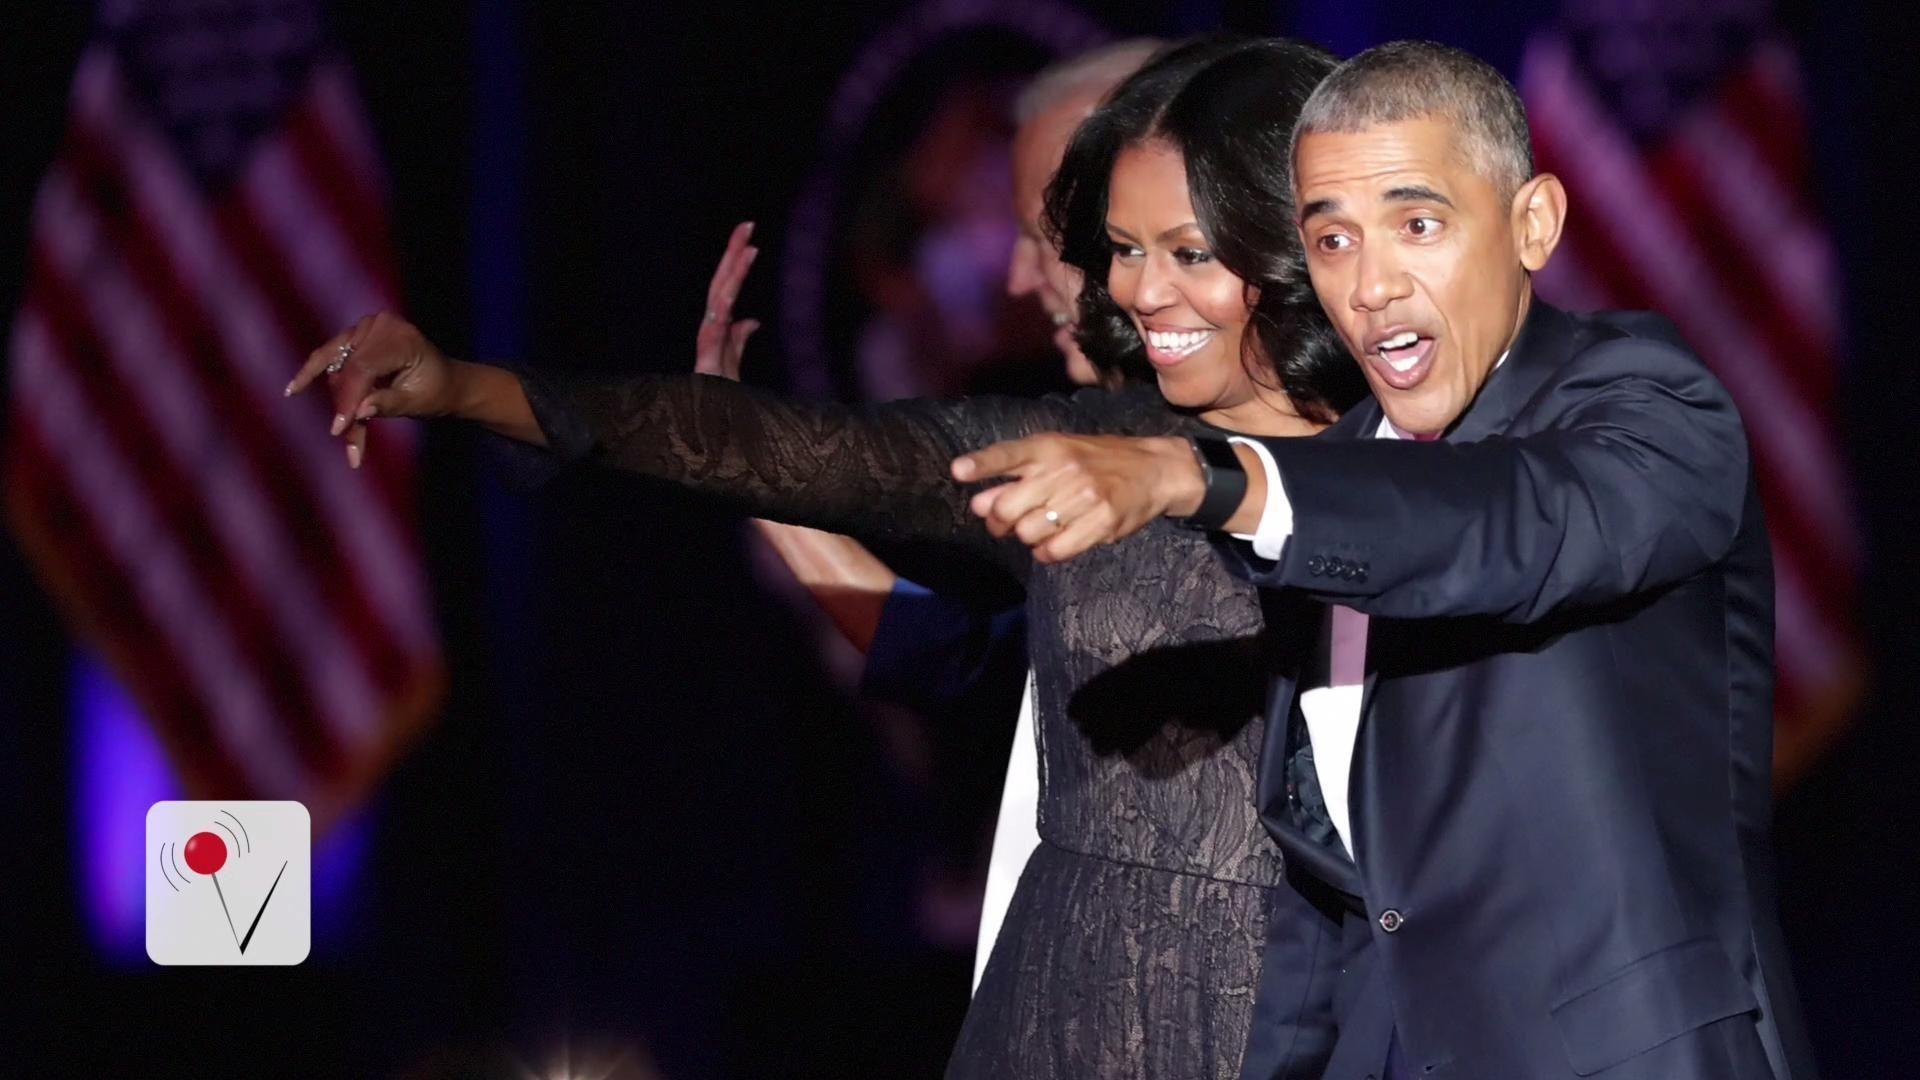 Barack Obama: Michelle Obama wishes she didn't have to be married